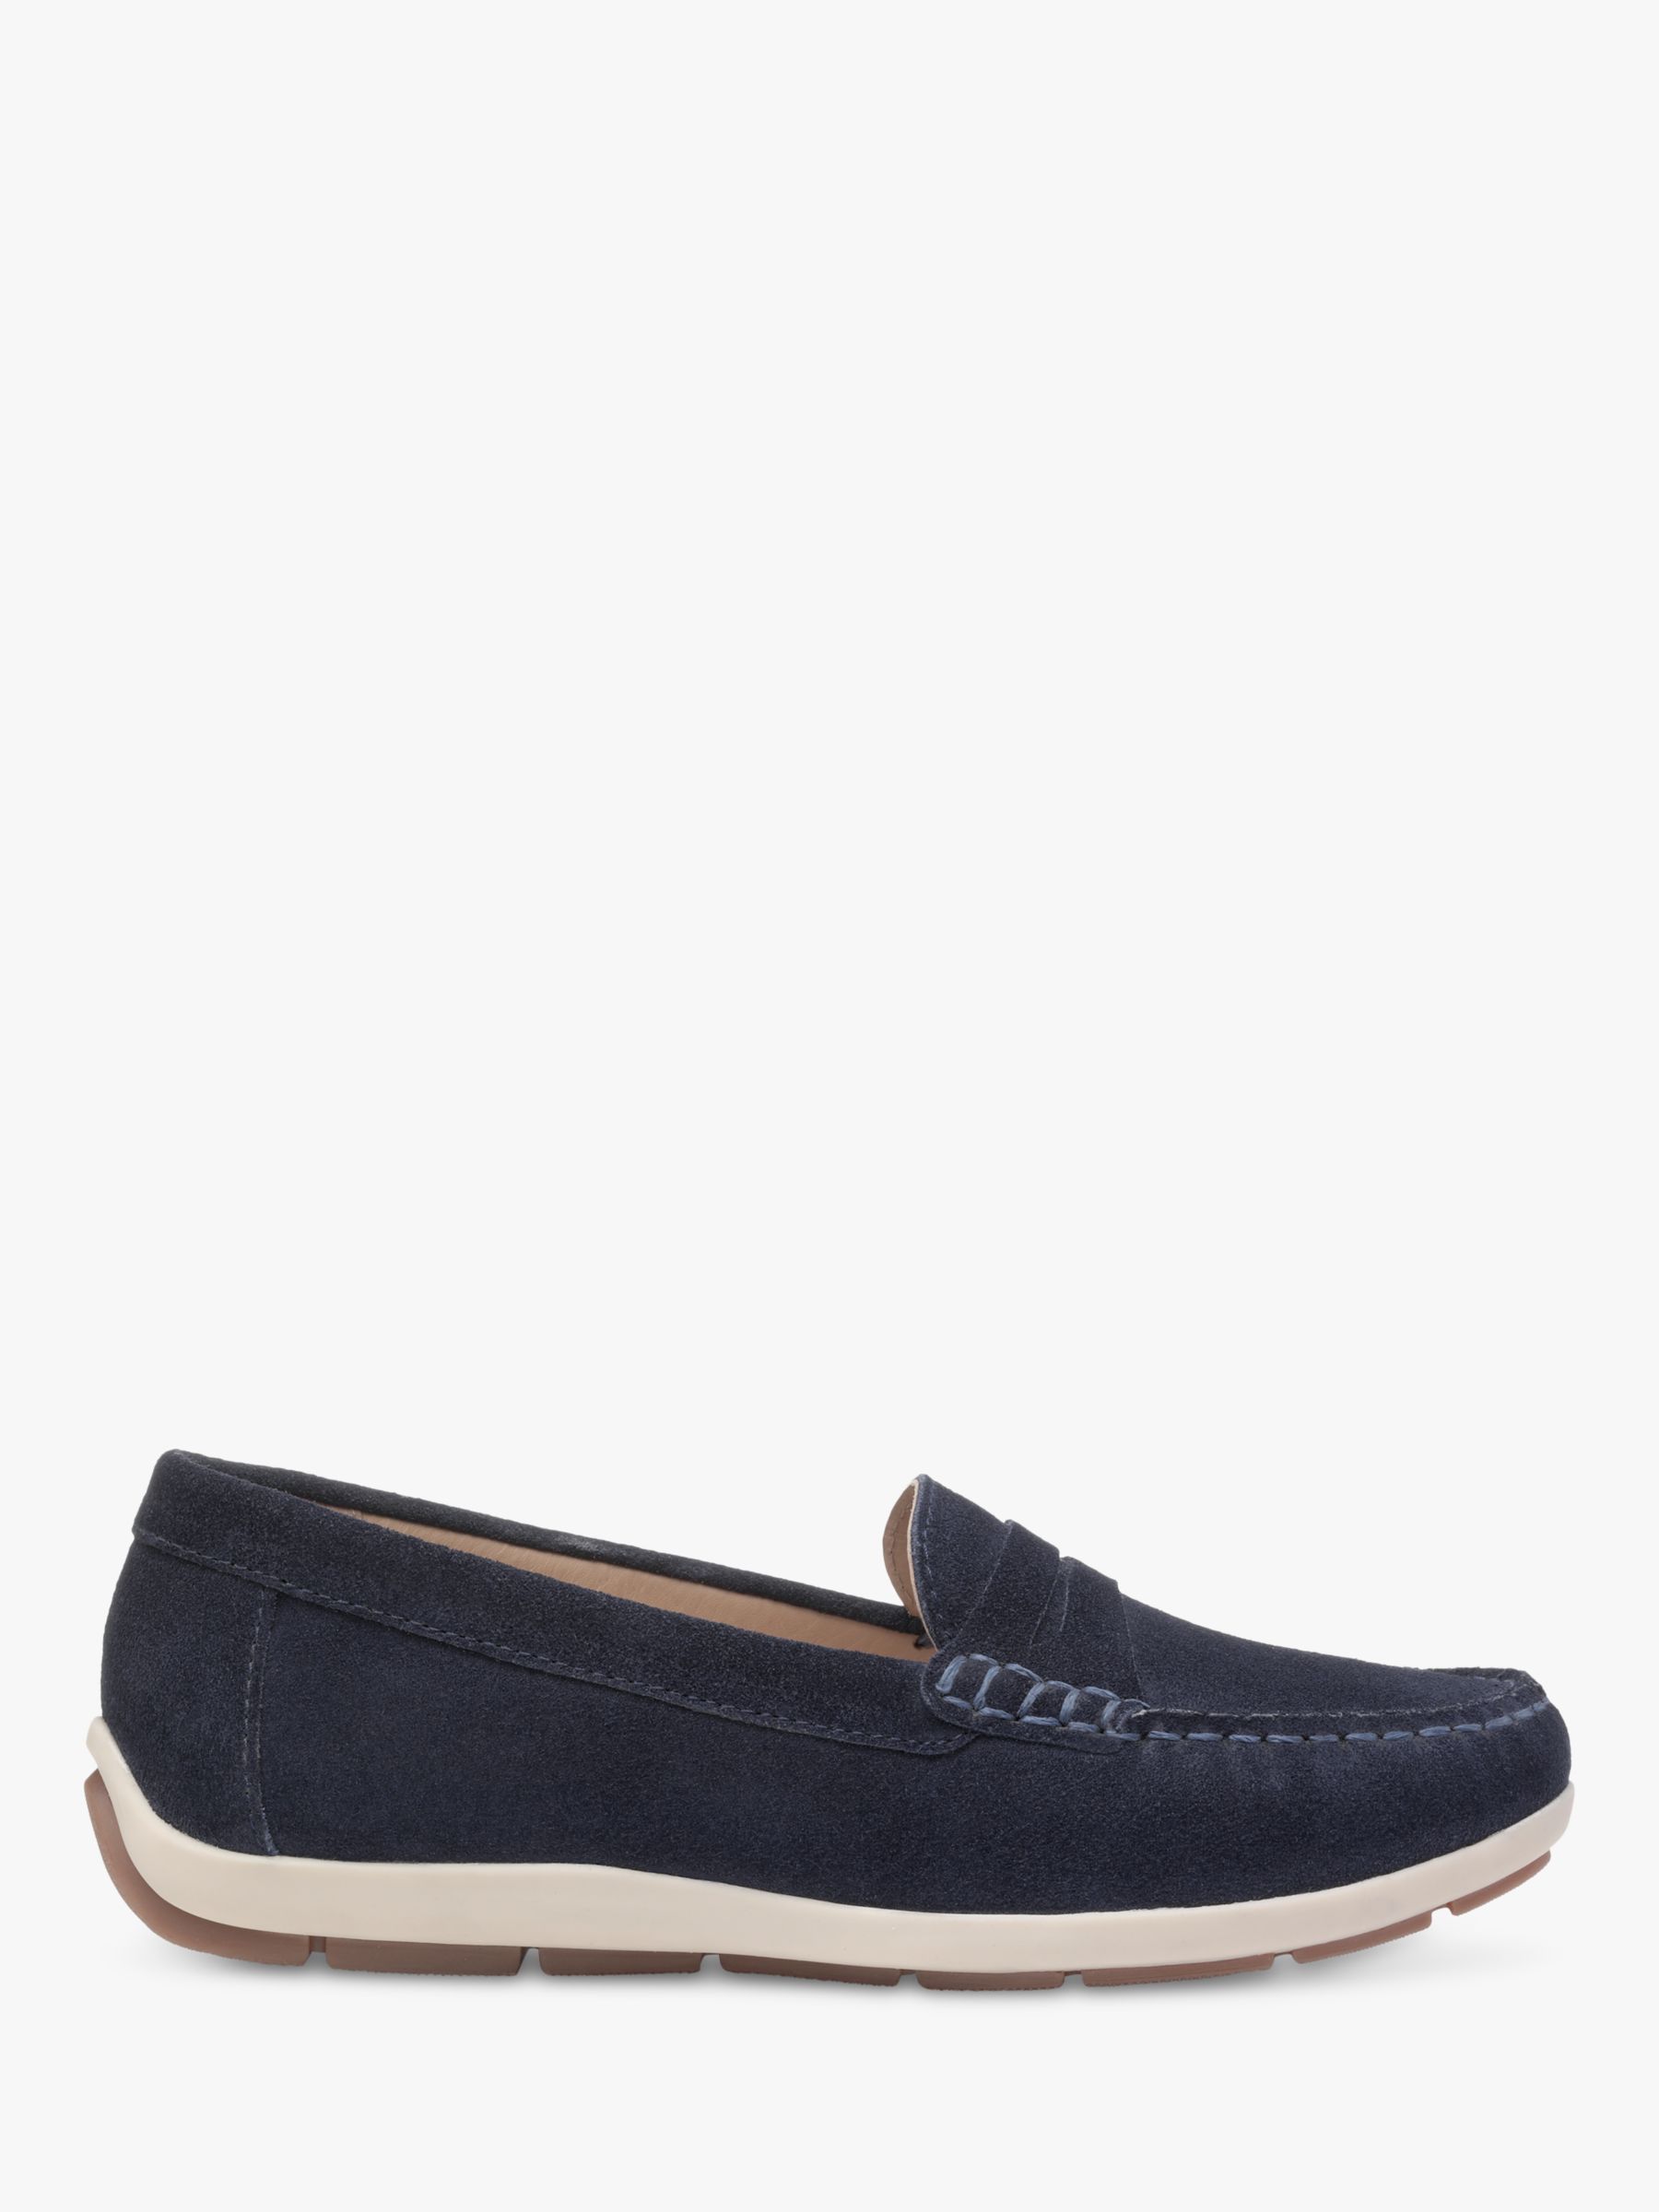 Hotter Pier Loafers, Navy at John & Partners